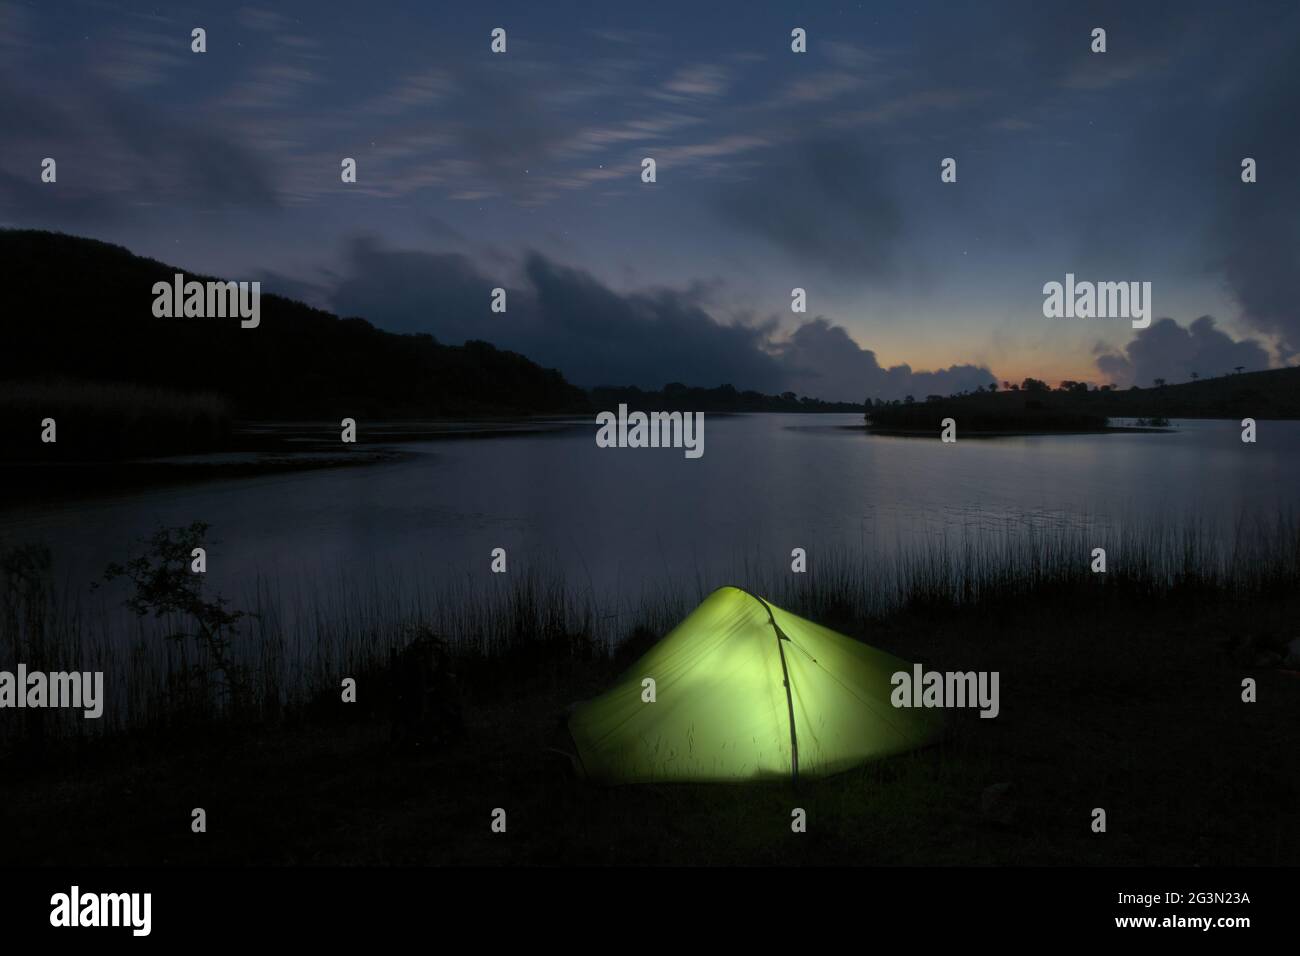 outdoor adventure in tent in the Sicily nature, wild camp by a lake at dusk in Nebrodi mountains Stock Photo